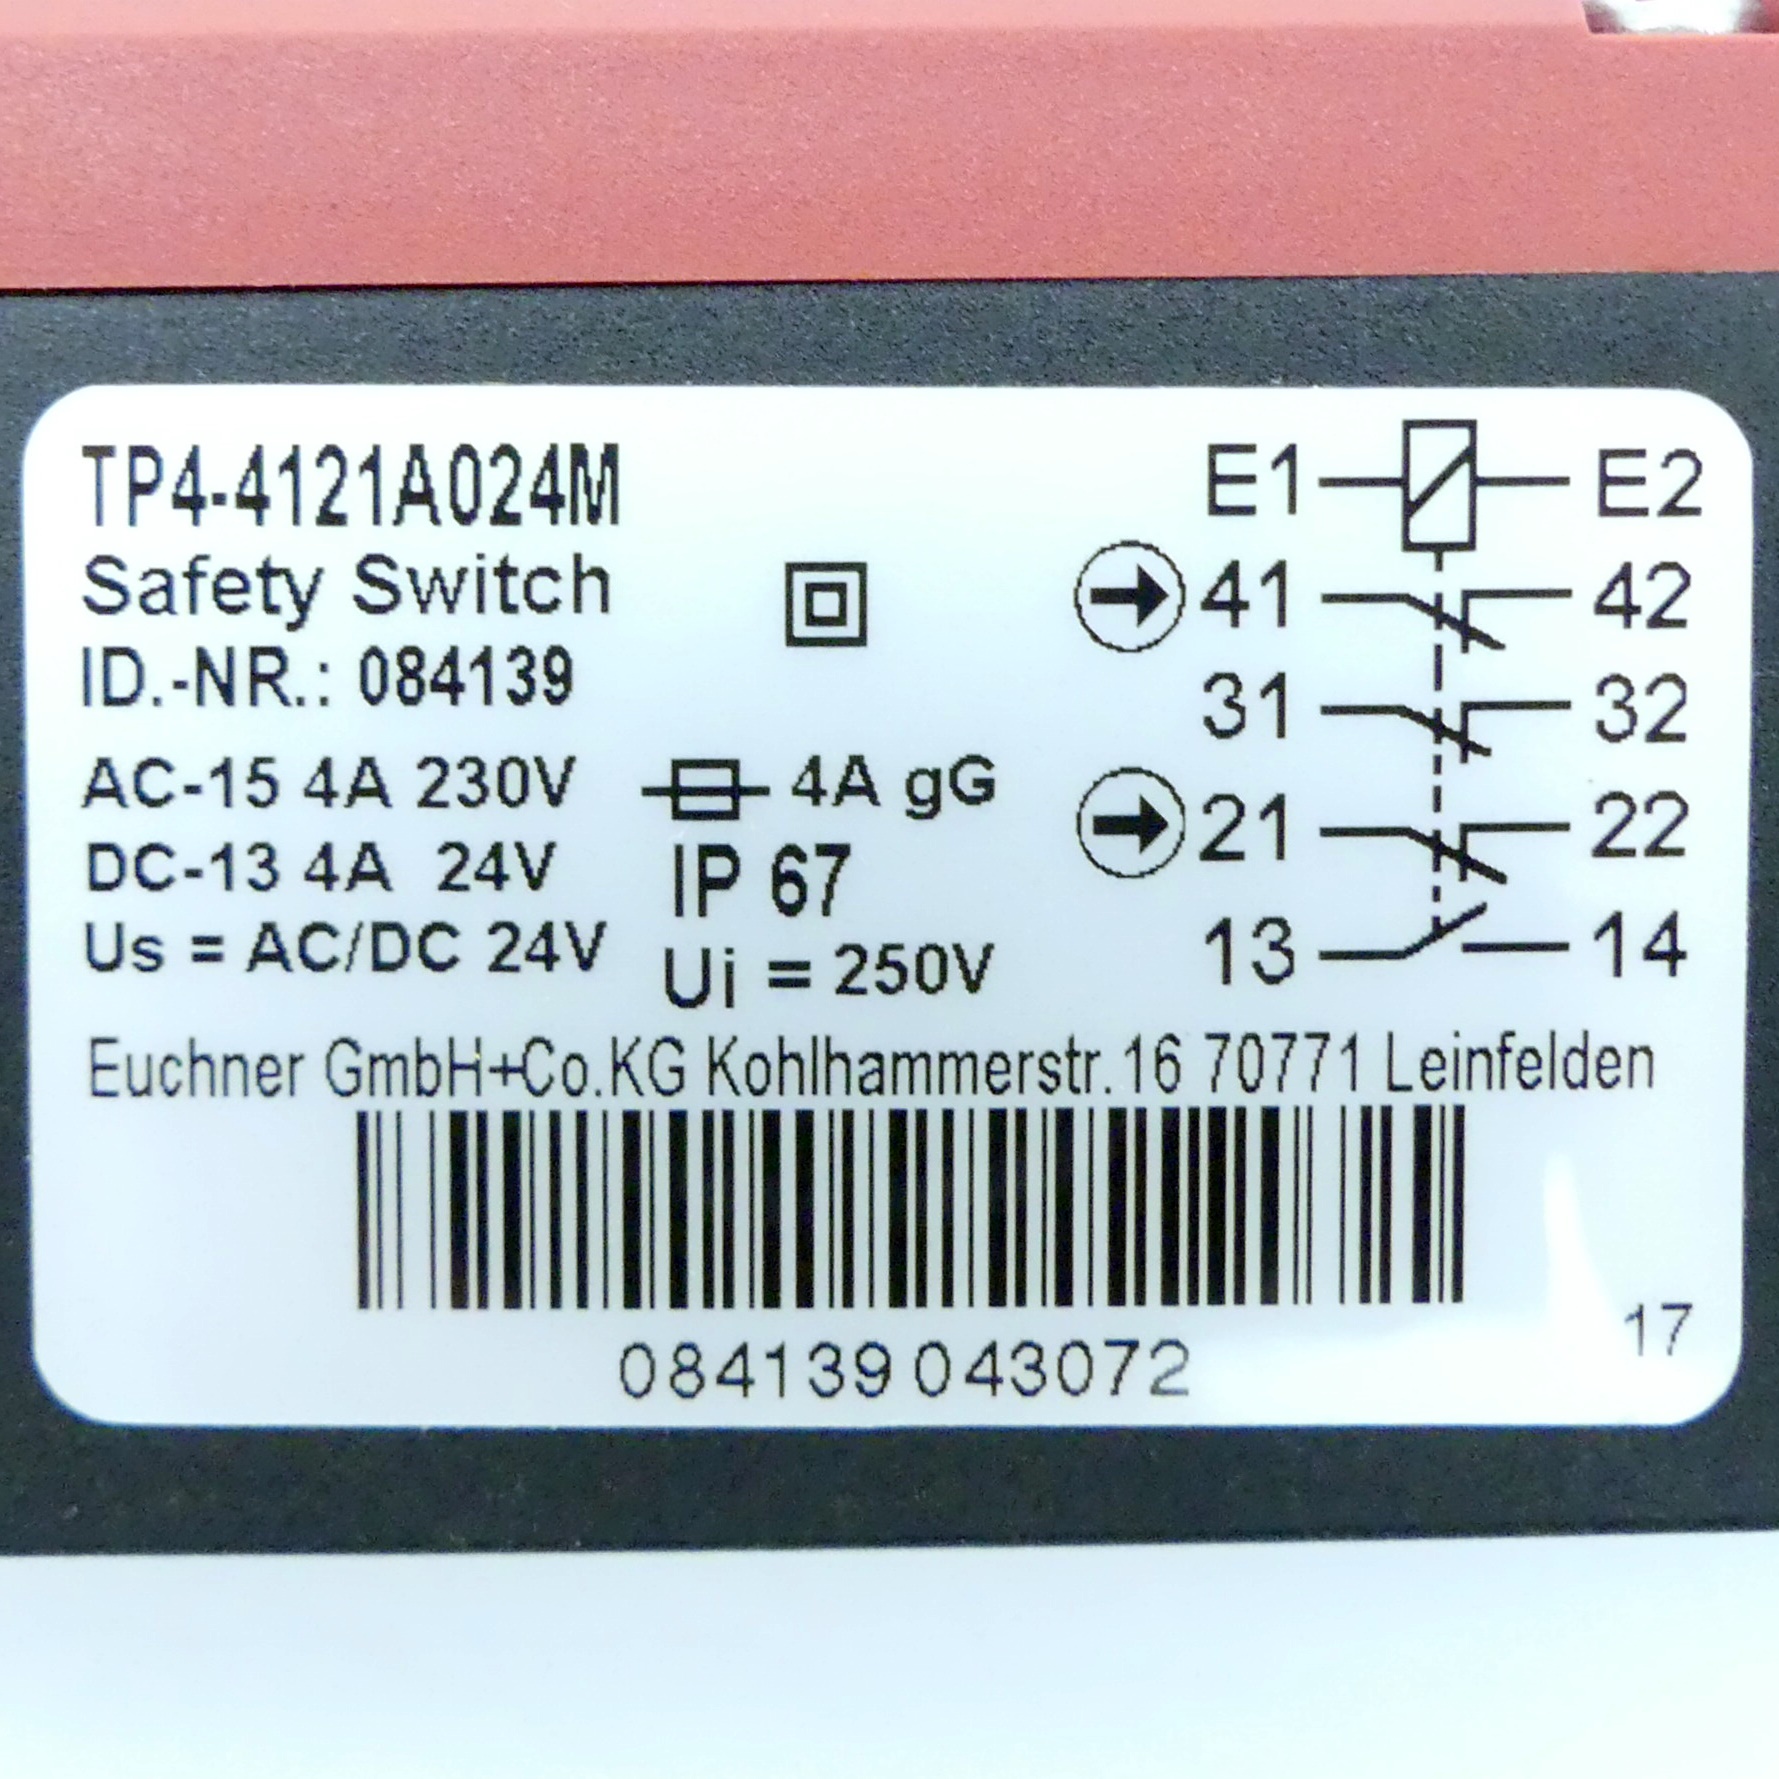 Safety switches 084139 